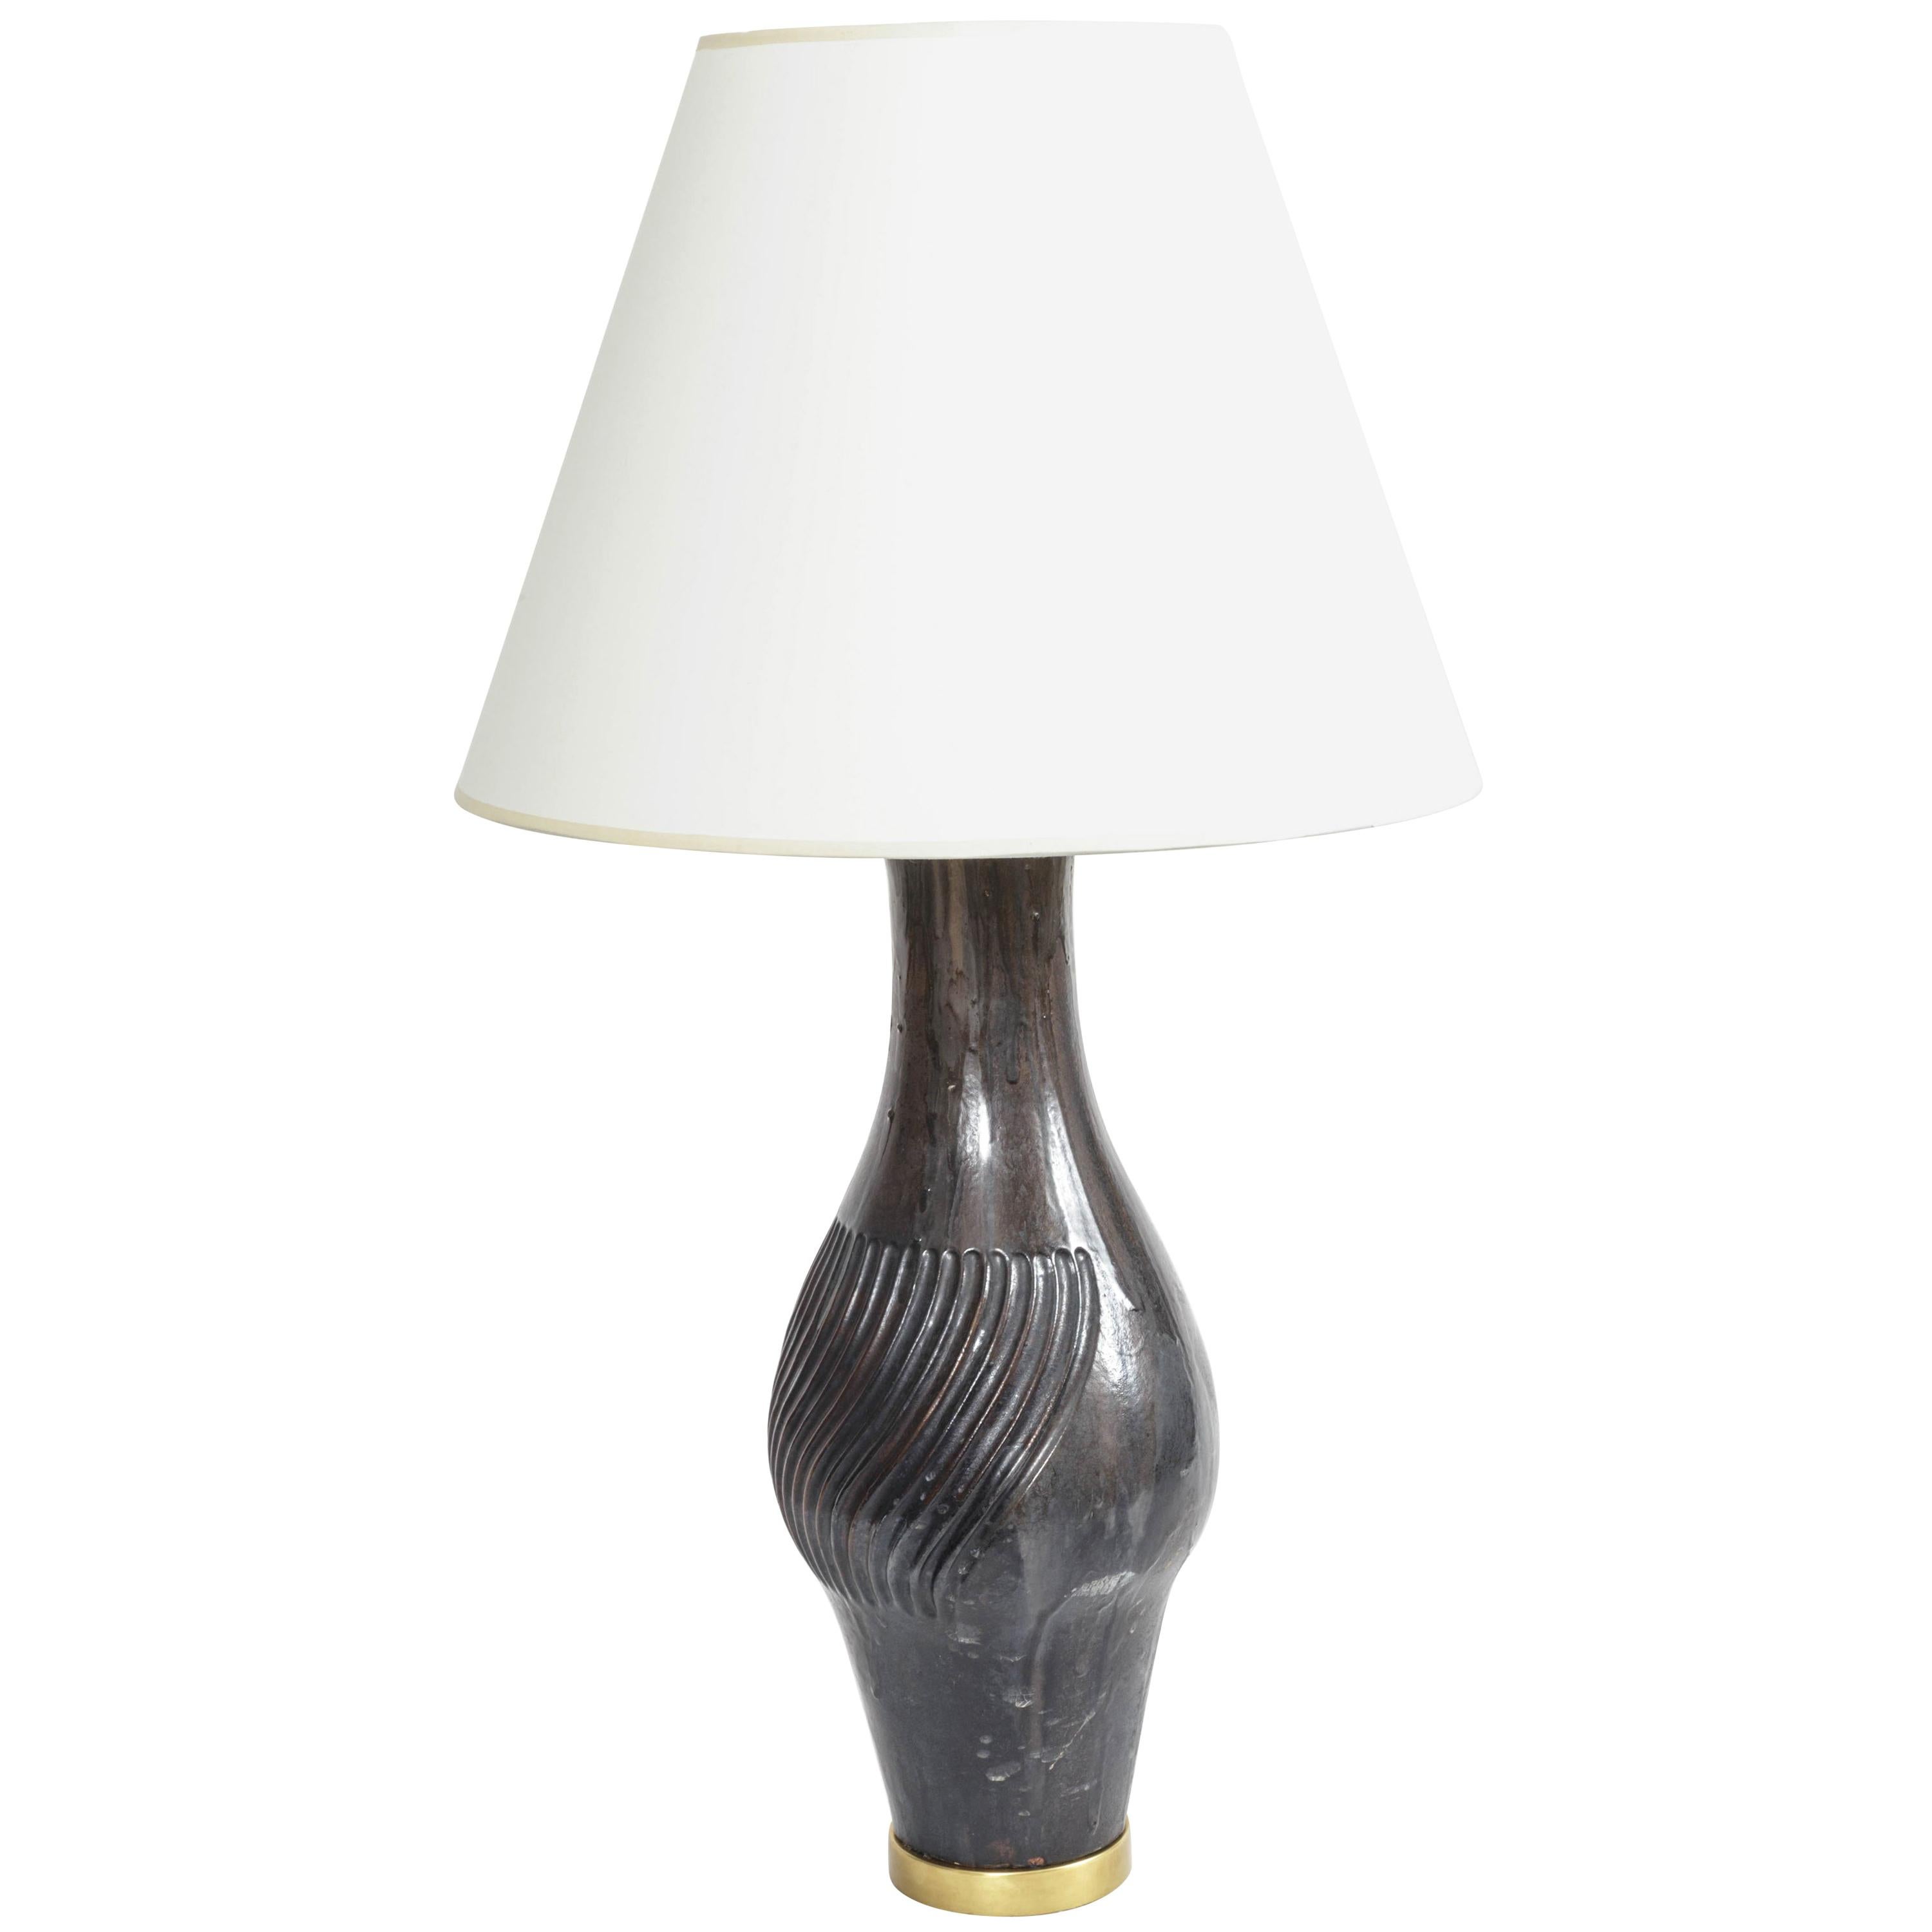 Large Ceramic and Brass Table Lamp by Marcello Fantoni, Italy, 1958 For Sale